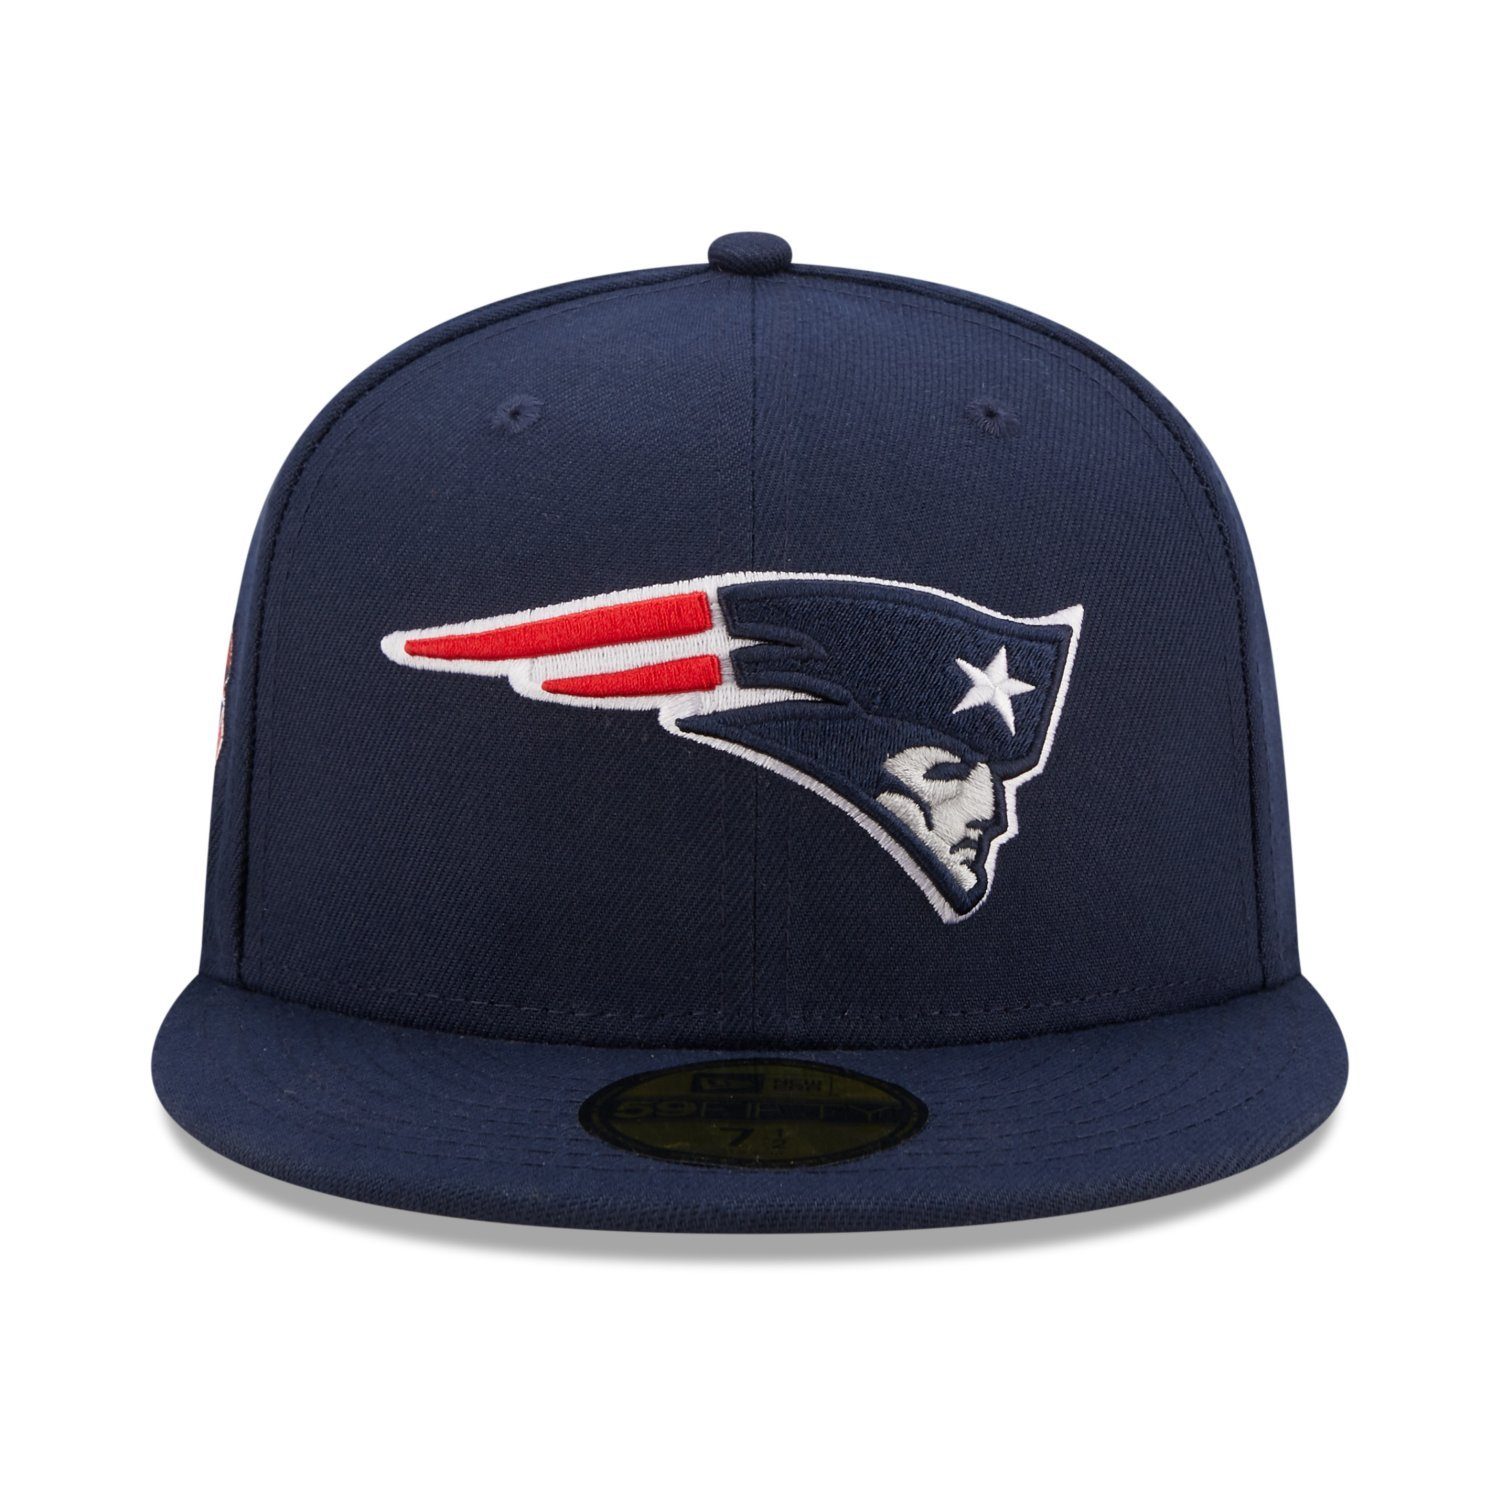 59Fifty Era New SIDE Cap Fitted New England Patriots PATCH